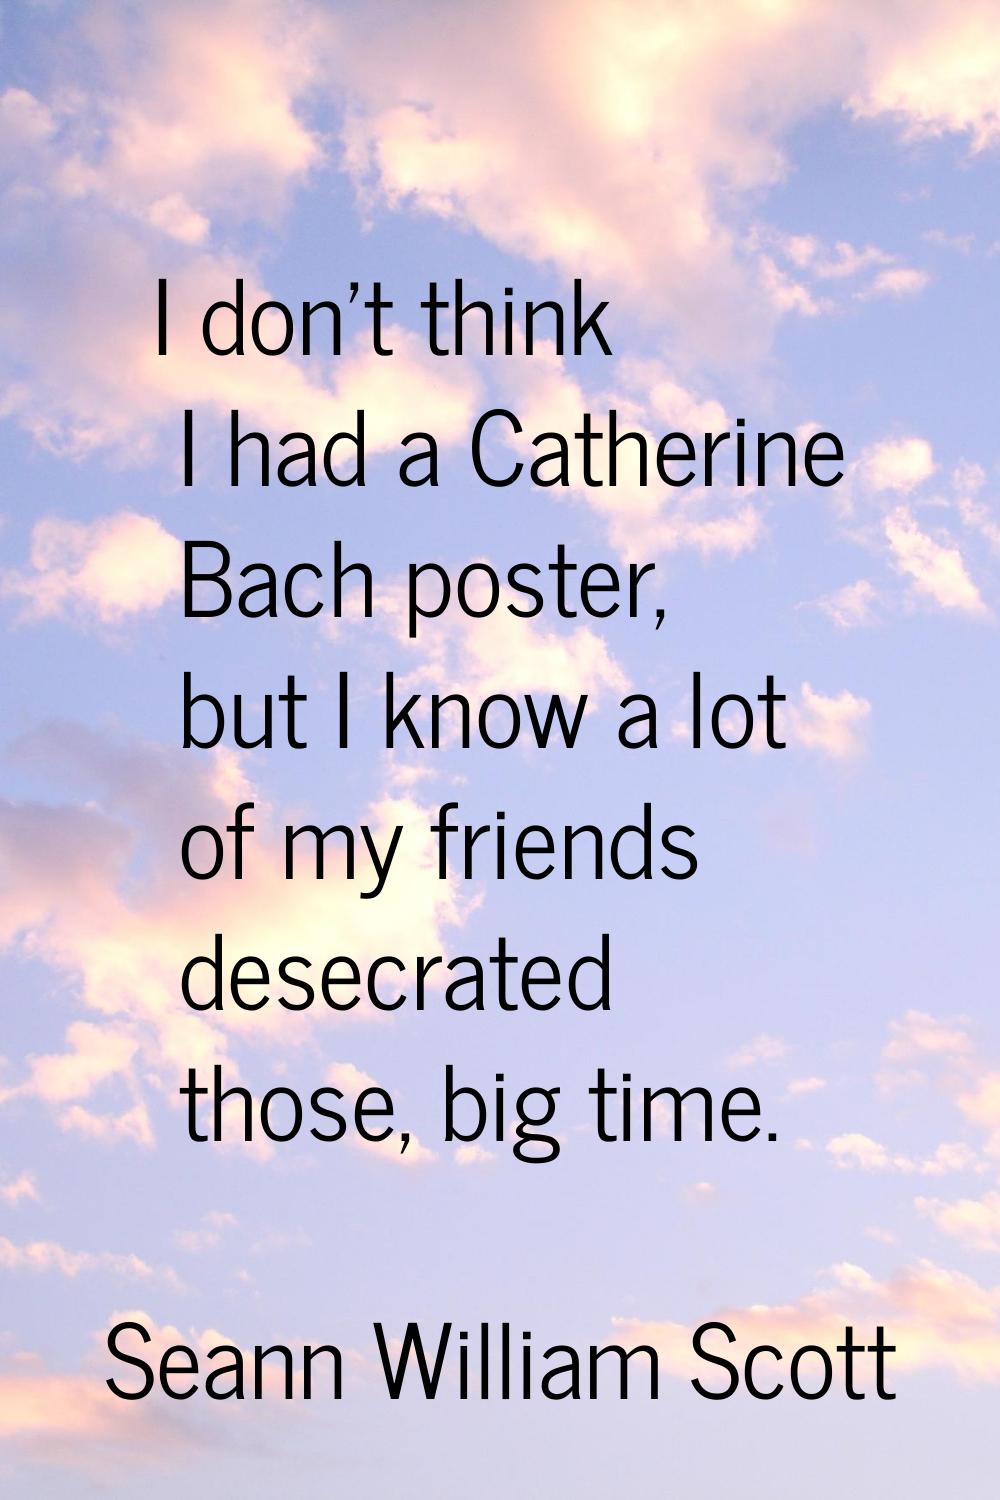 I don't think I had a Catherine Bach poster, but I know a lot of my friends desecrated those, big t